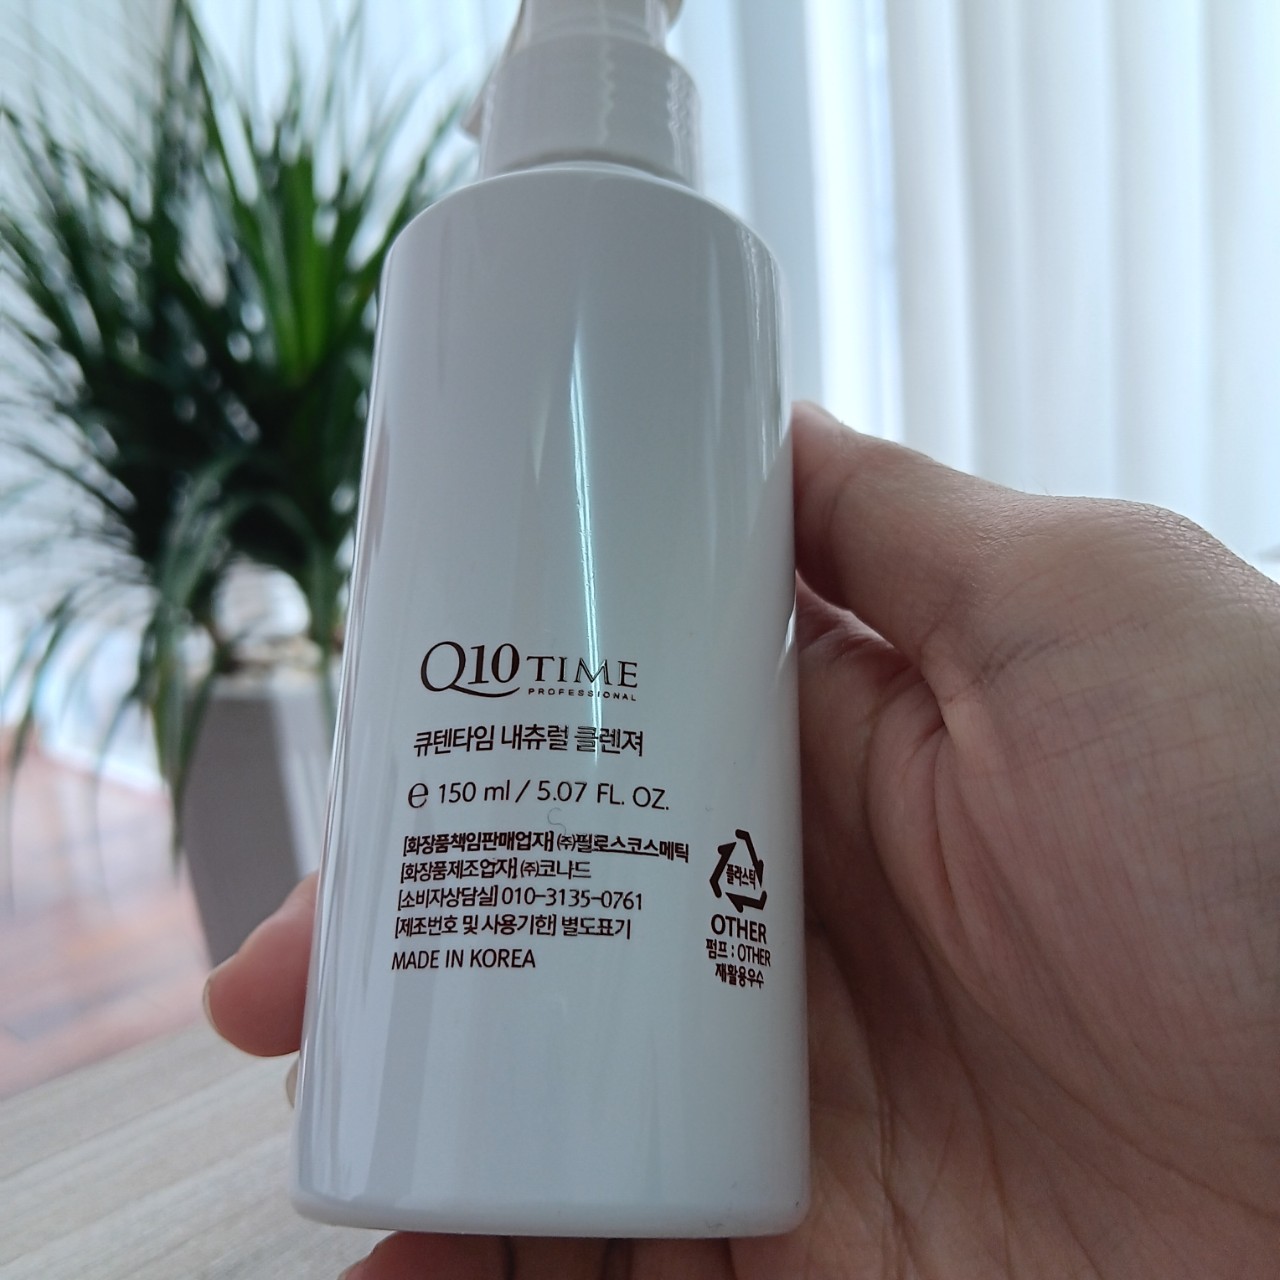 Q10 Time Natural Cleanser 150ml